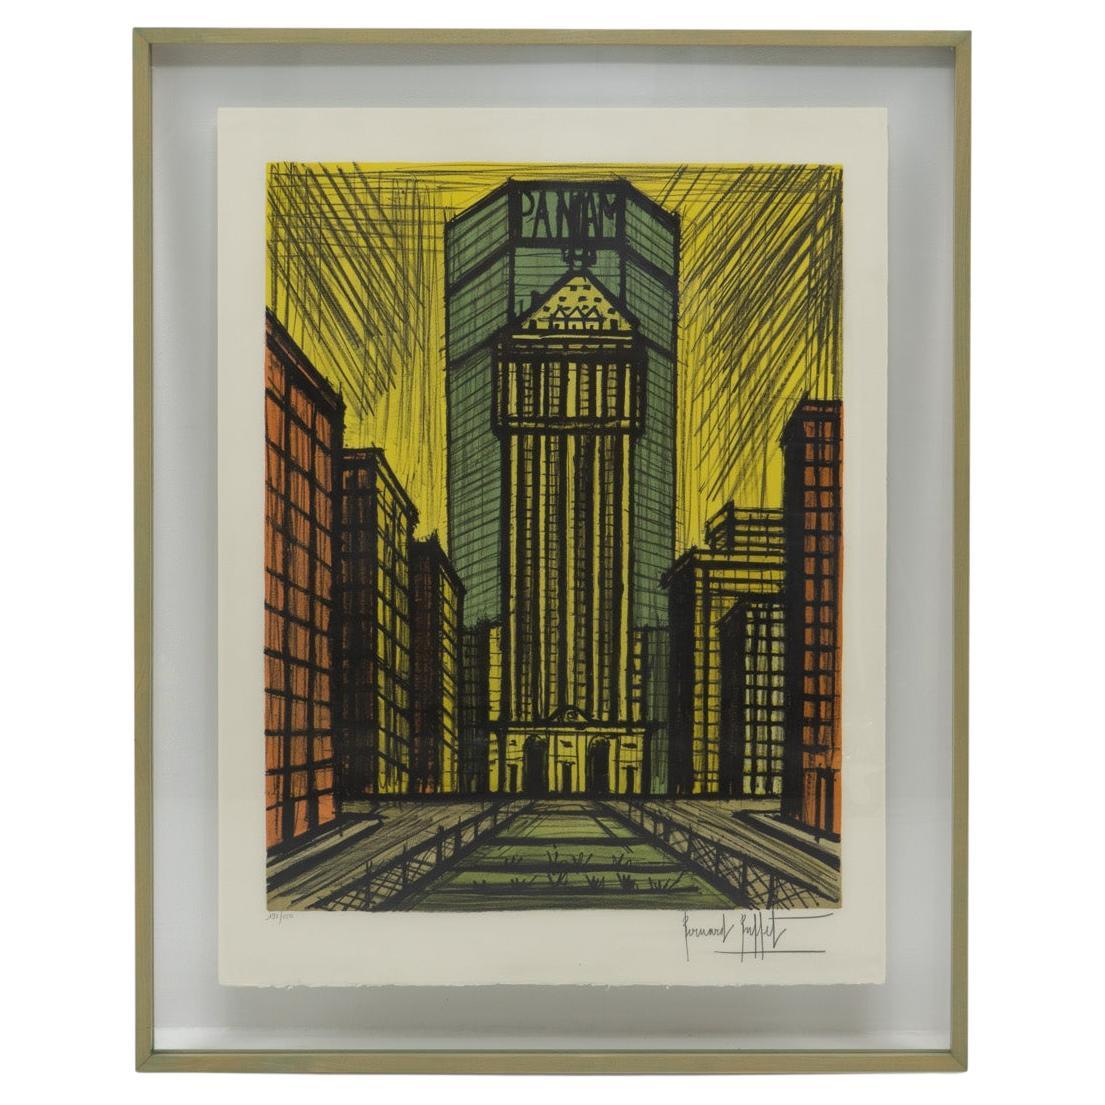 Lithograph by Bernard Buffet “Panam” New York Landmark Building, Signed, 1980s For Sale